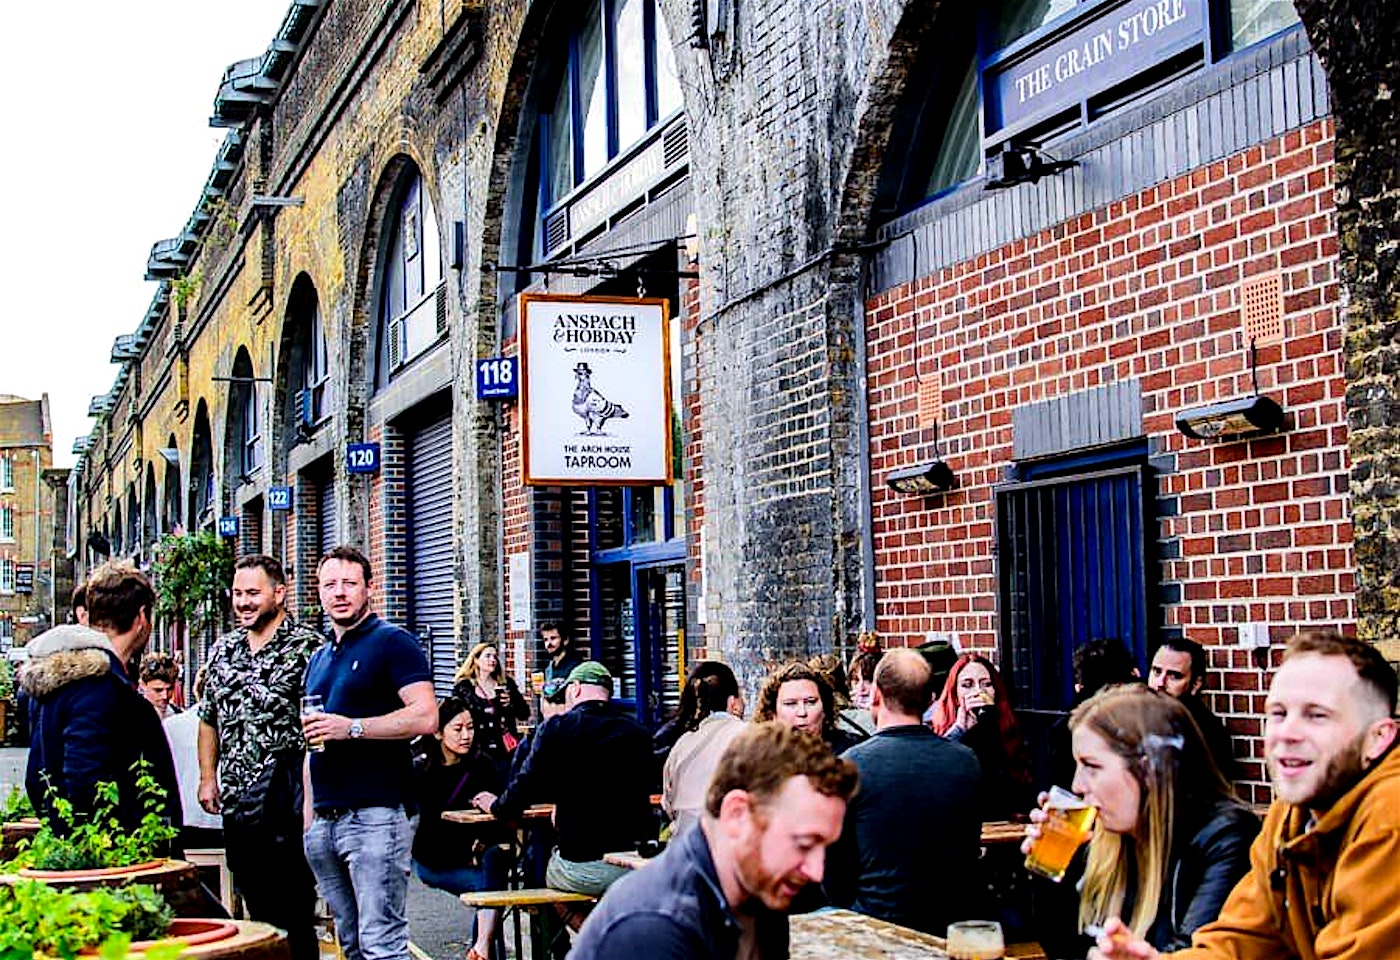 outdoor seating at the arch house taproom in bermondsey london